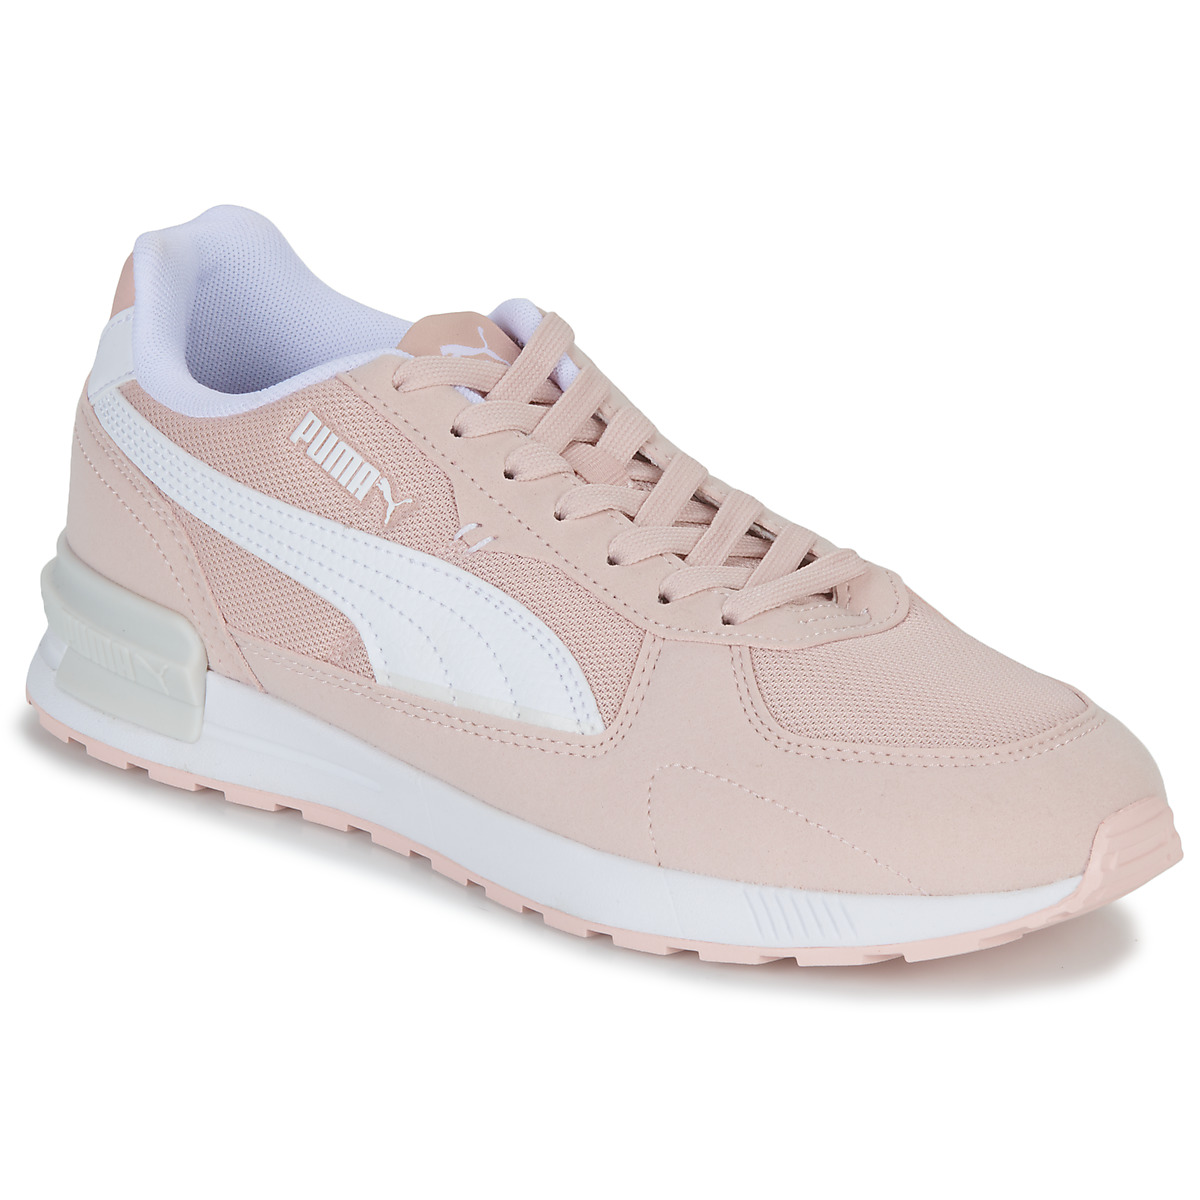 Spartoo / top Graviton Puma ! Shoes White Pink delivery - Free Women - NET | / Beige trainers Low